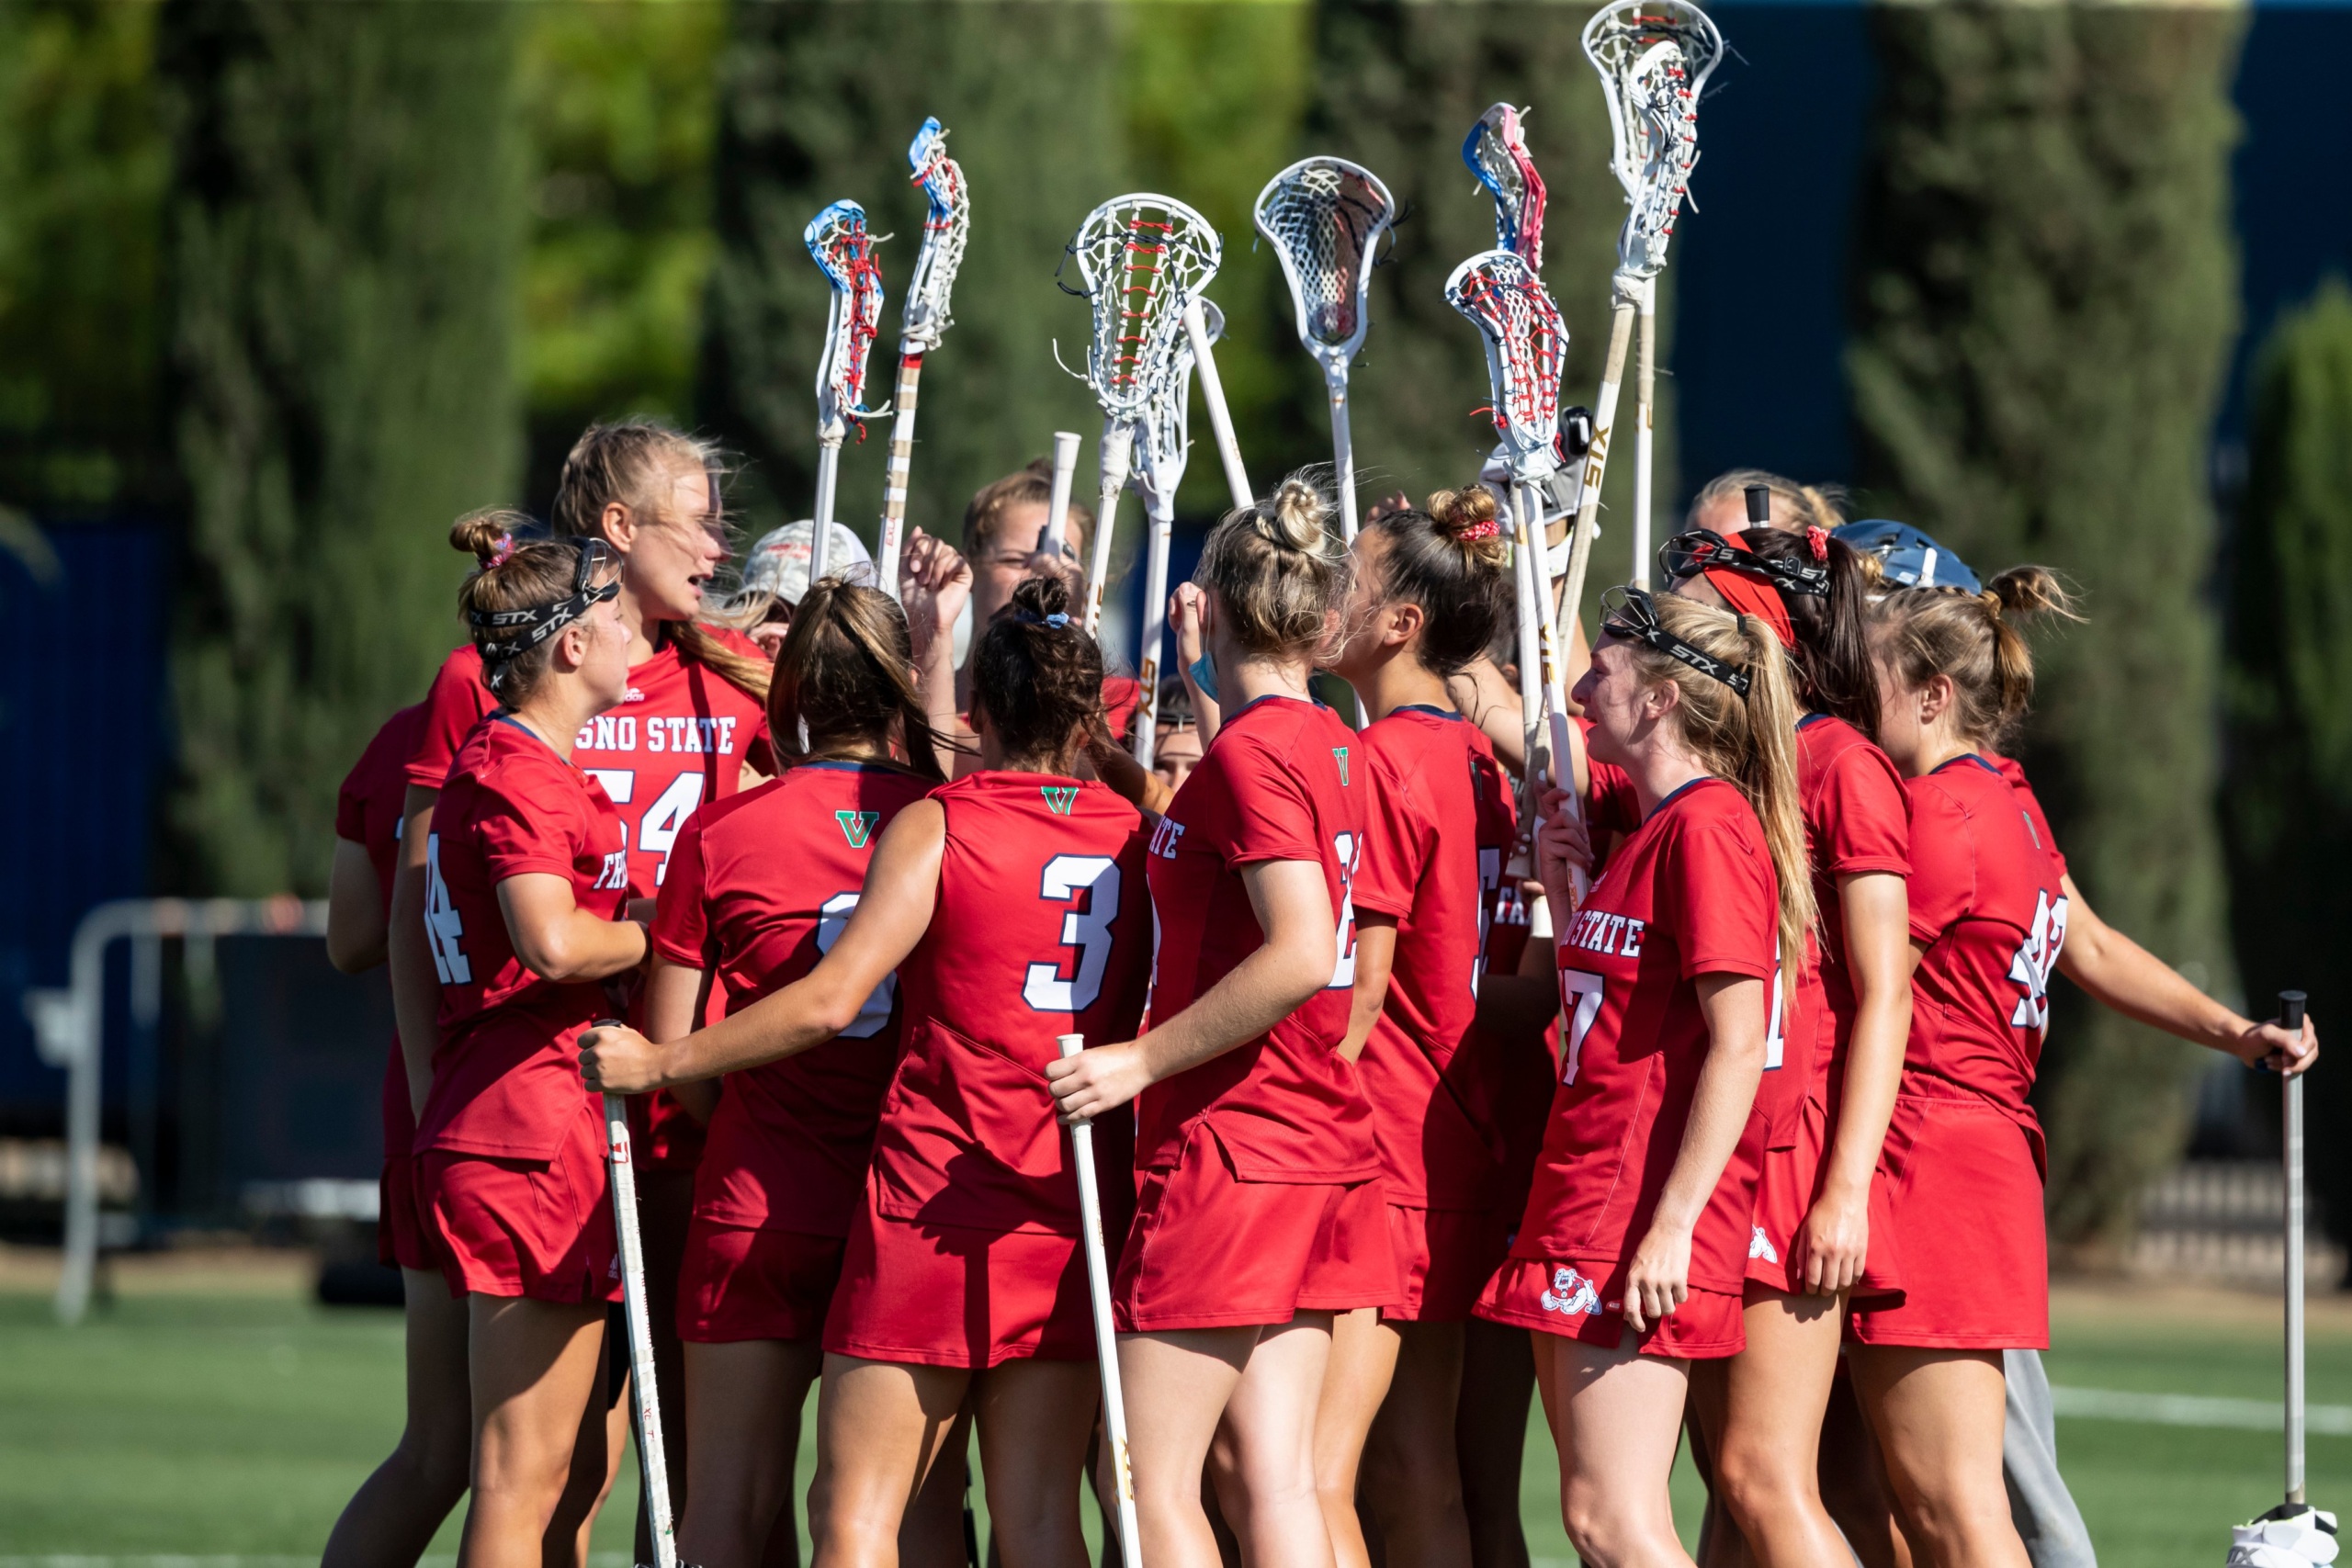 A group of about 15 femme student lacrosse players huddle in a circle, wearing red Fresno State sports uniforms, facing away from the camera, lifting their lacrosse sticks into the air in victory.